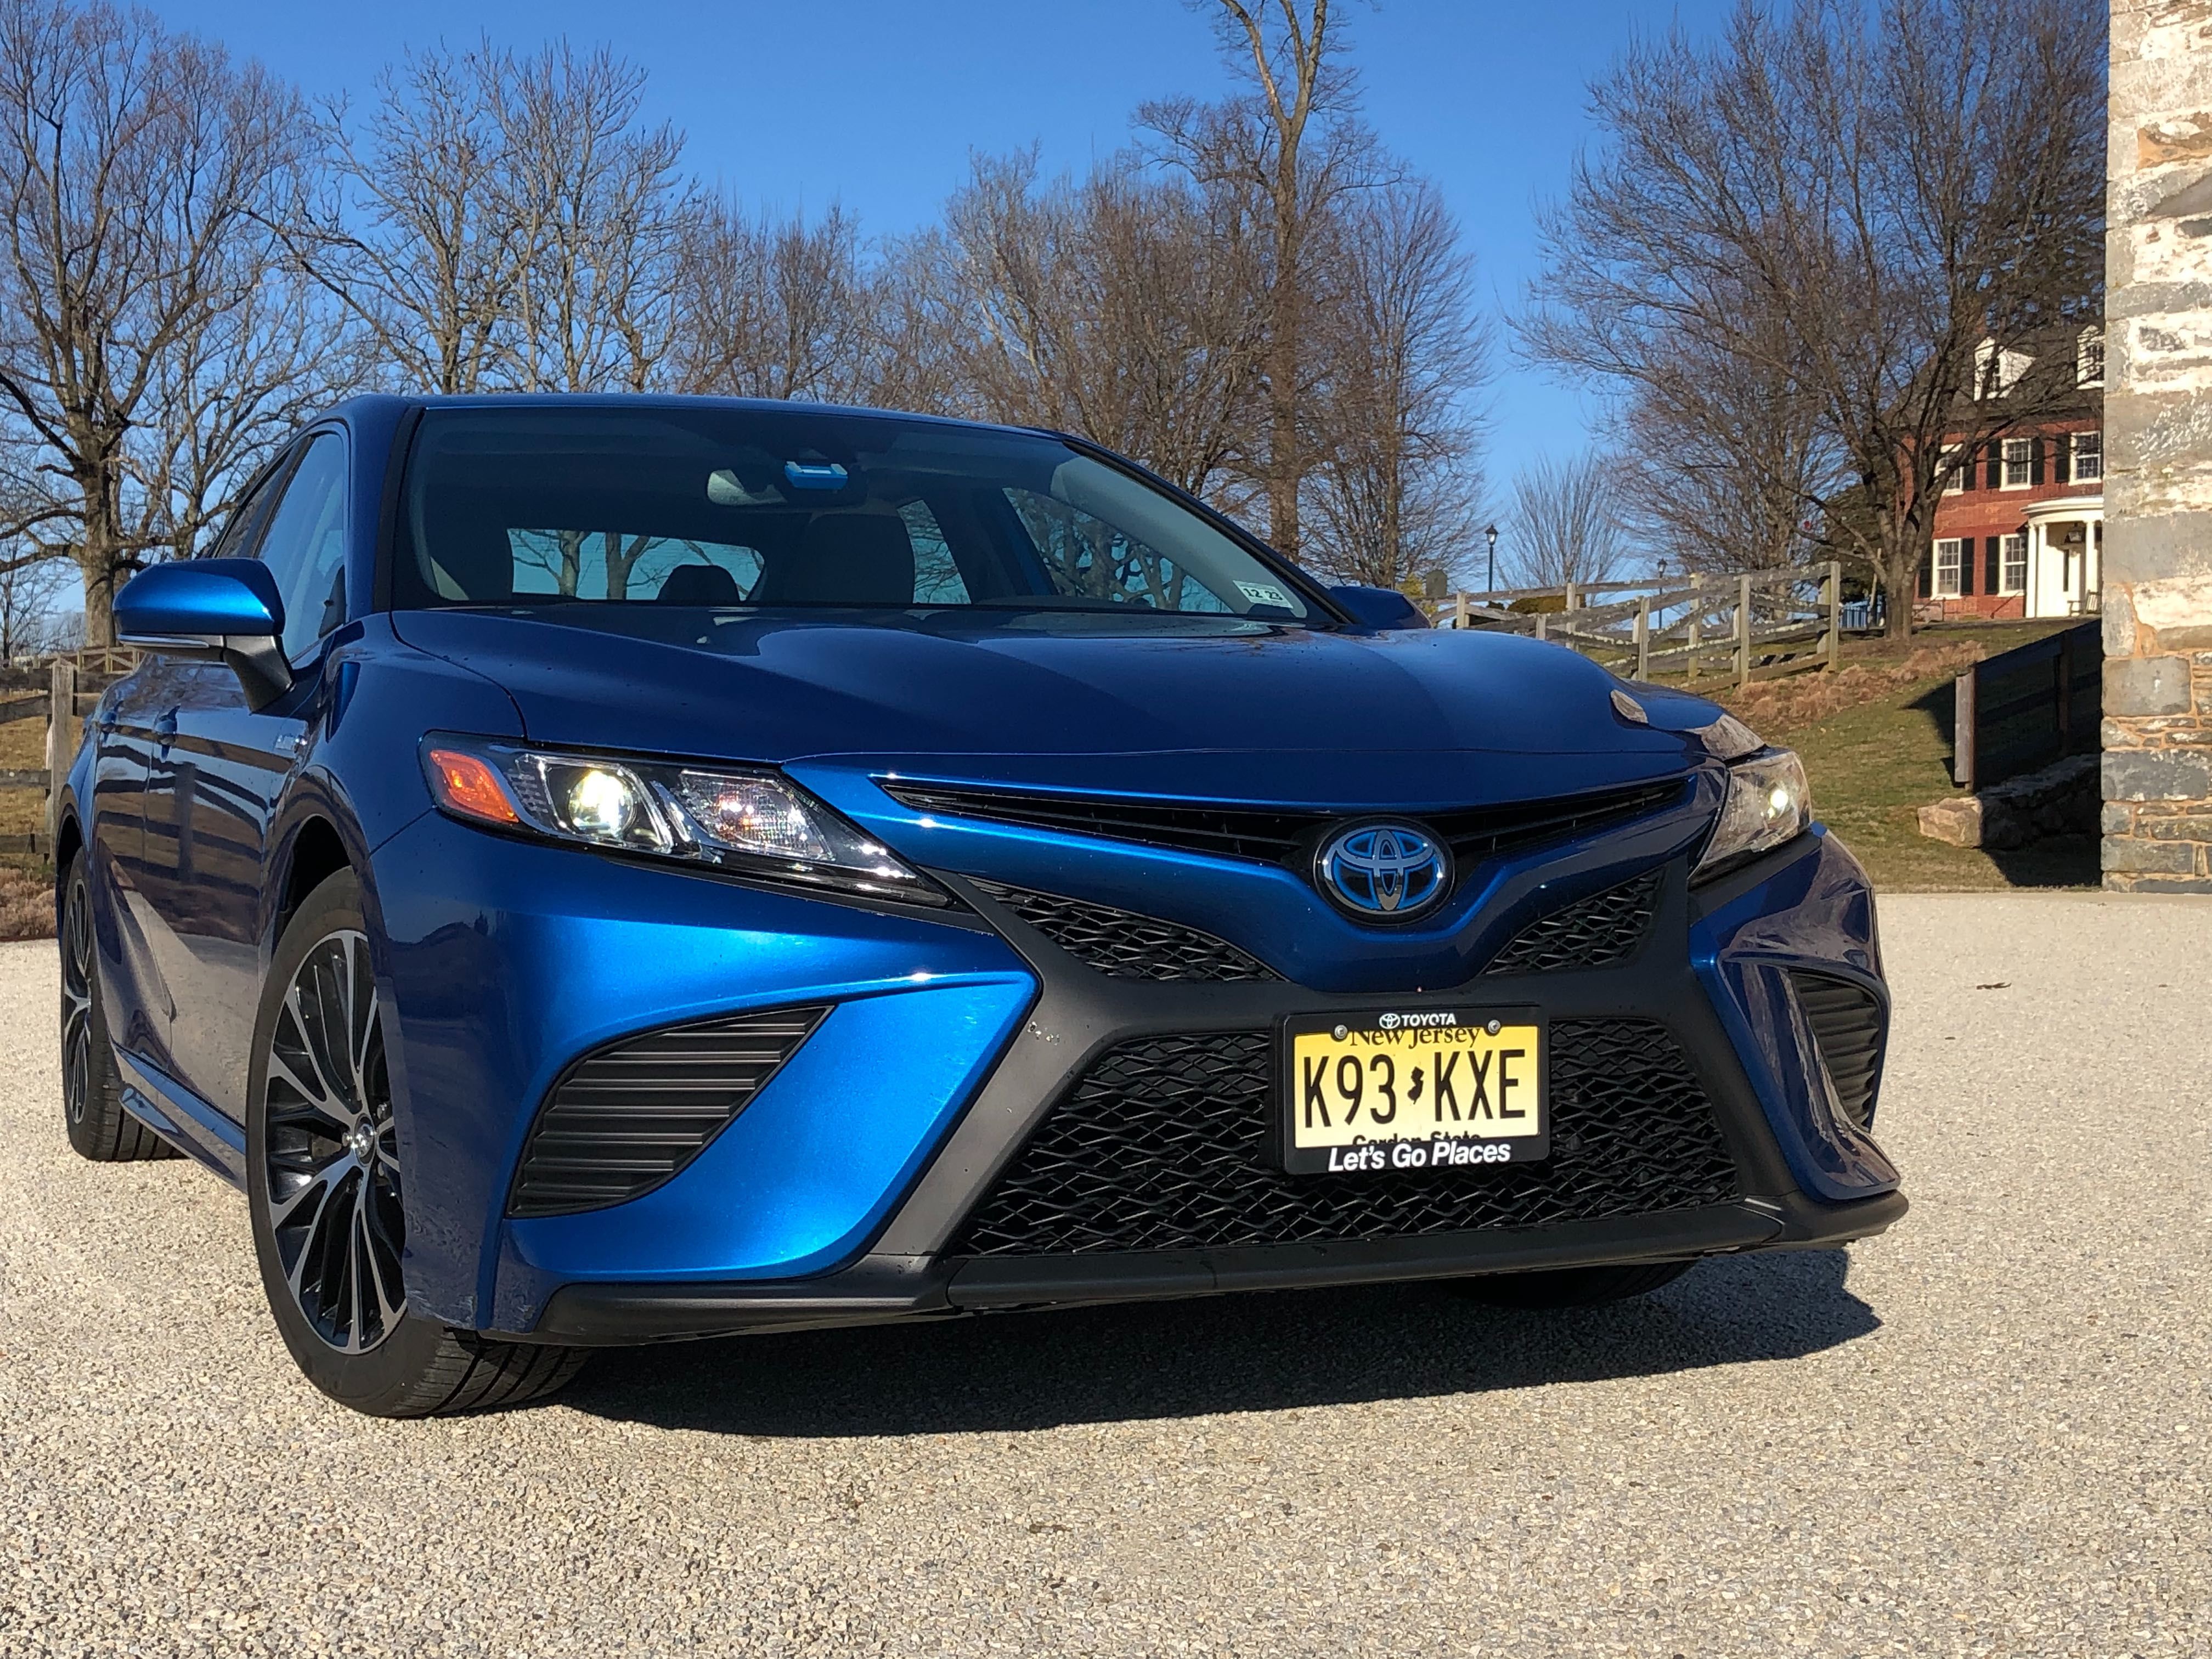 Toyota Camry Hybrid offers space and style without sacrificing MPG